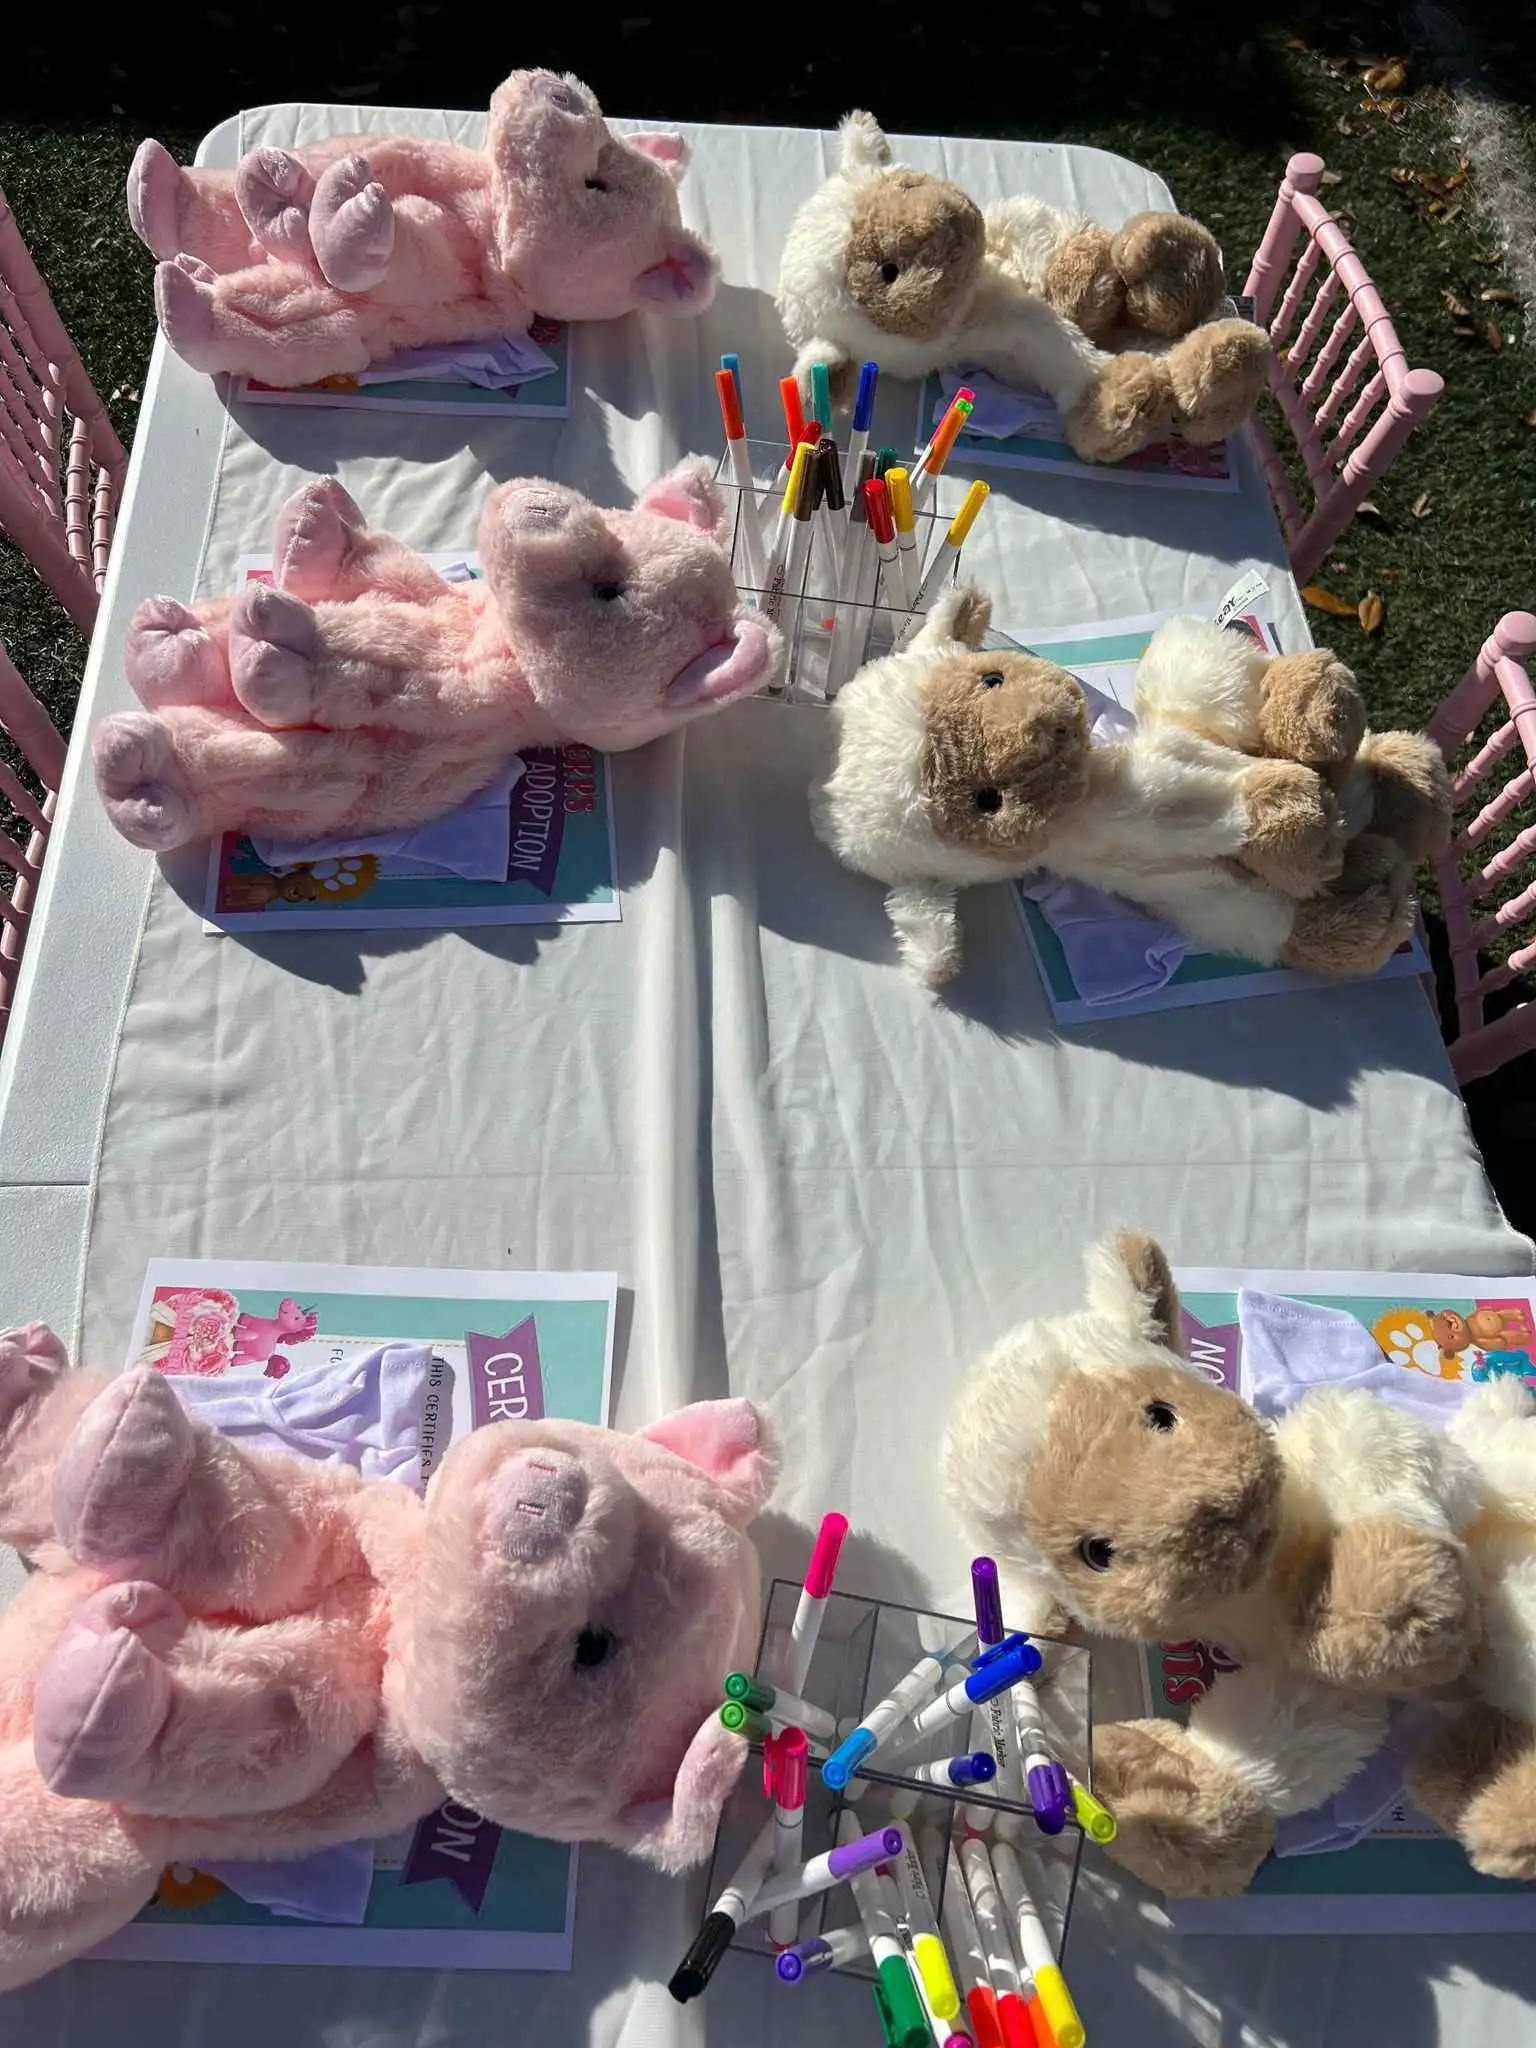 A table with several stuffed animals and a build a buddy kit on it.